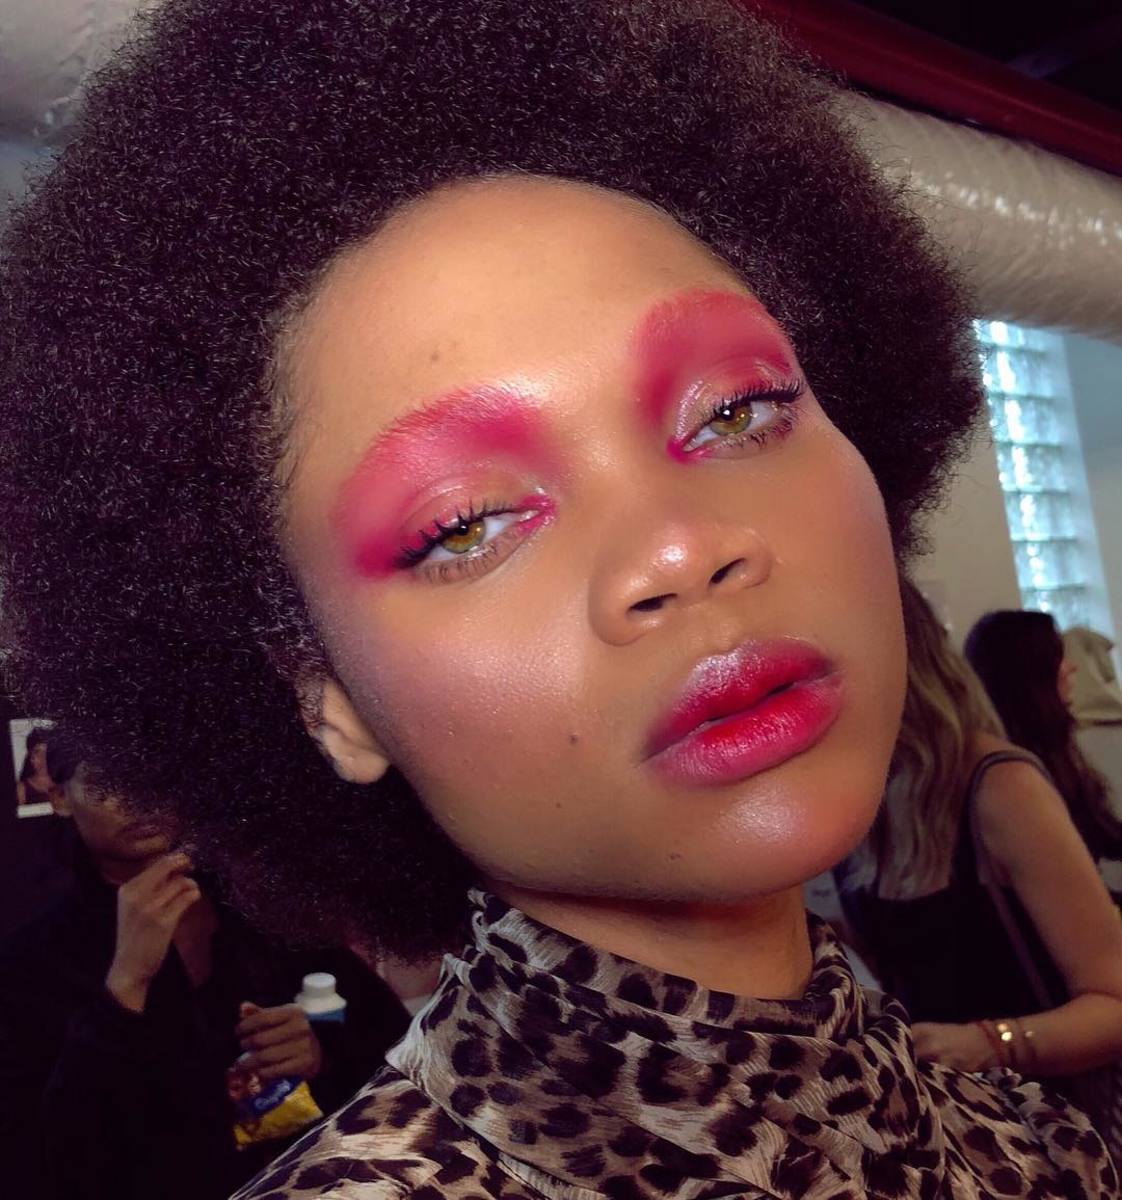 One of the makeup looks from Savage x Fenty's Fall 2018 show. Photo: @fentybeauty/Instagram